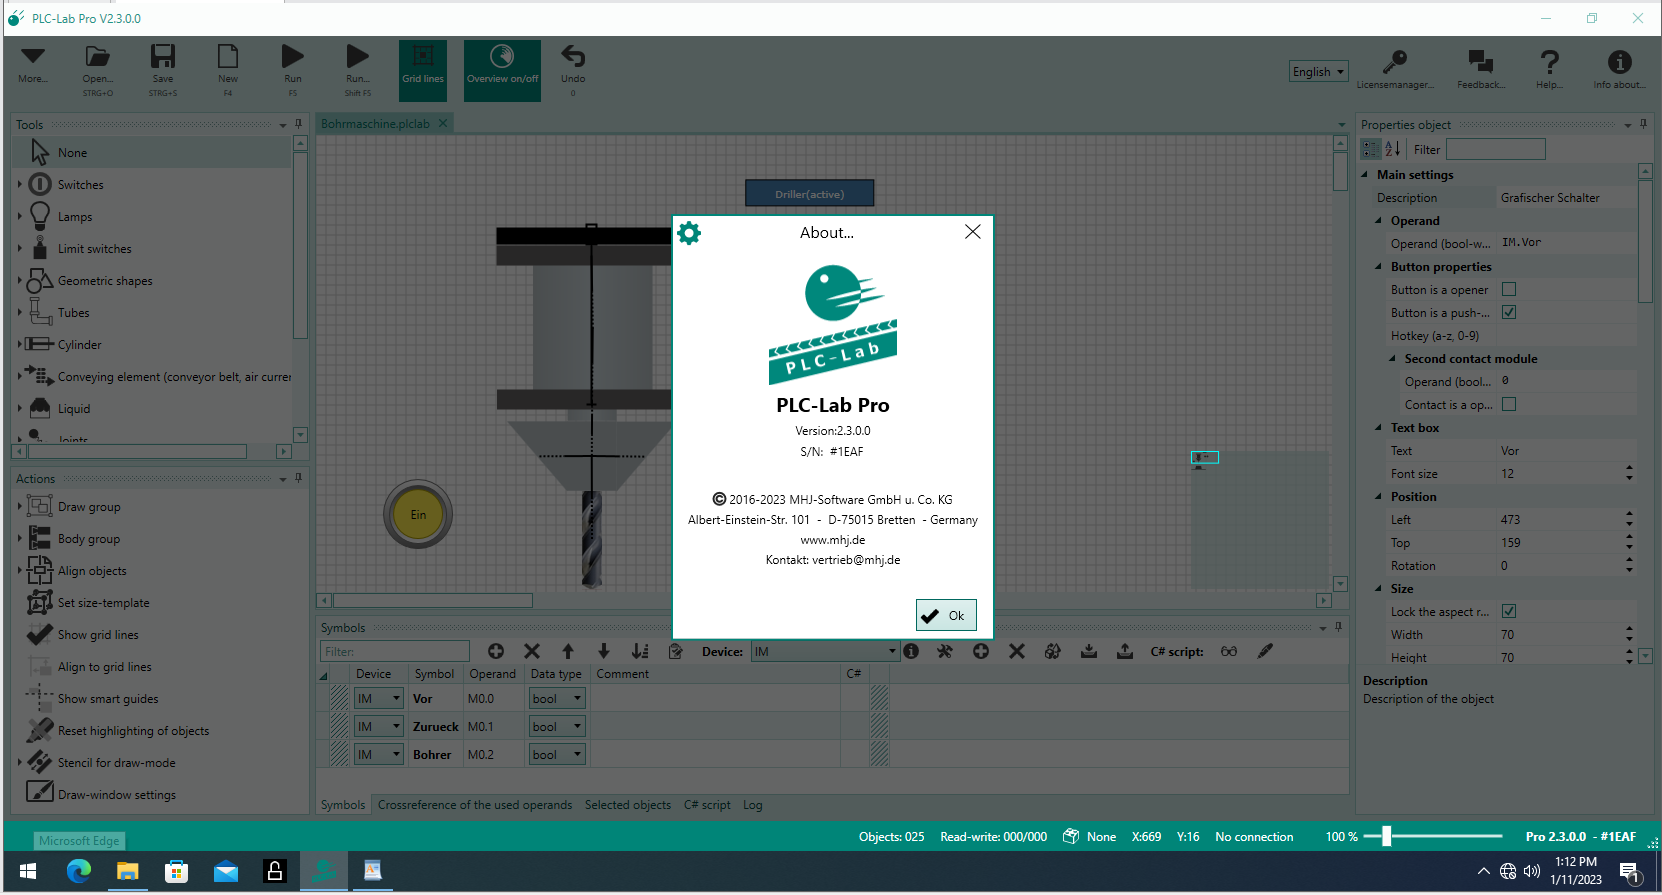 Working with PLC-Lab Pro 2.3.0 full license